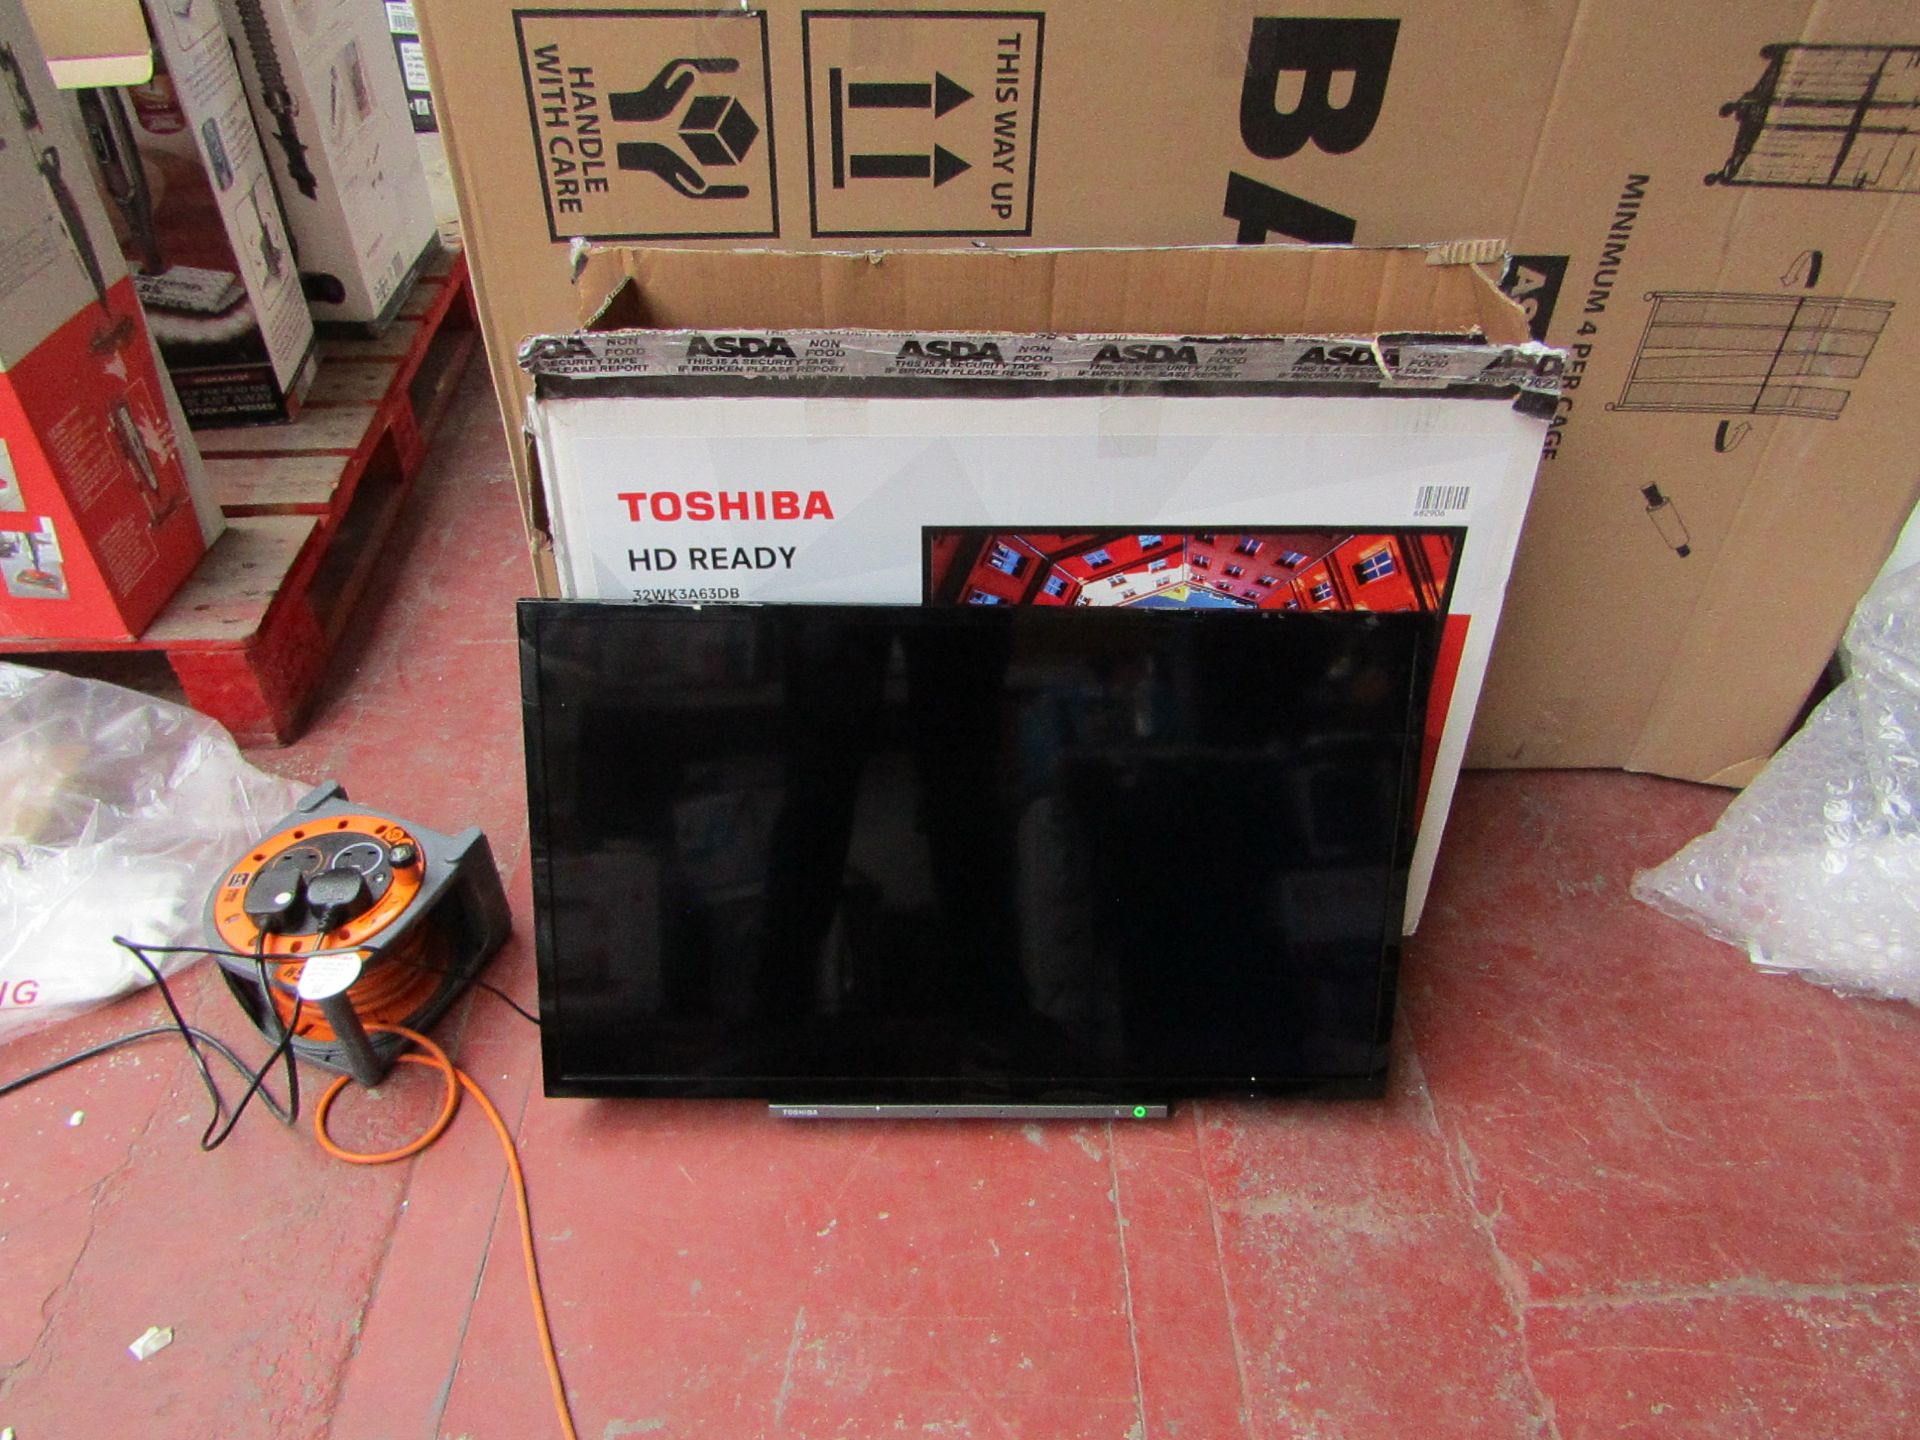 | 1x | TOSHIBA 32" HD READY TV / BUILT IN ALEXA | POWERS ON INCLUDES REMOTE CONTROL & STAND |